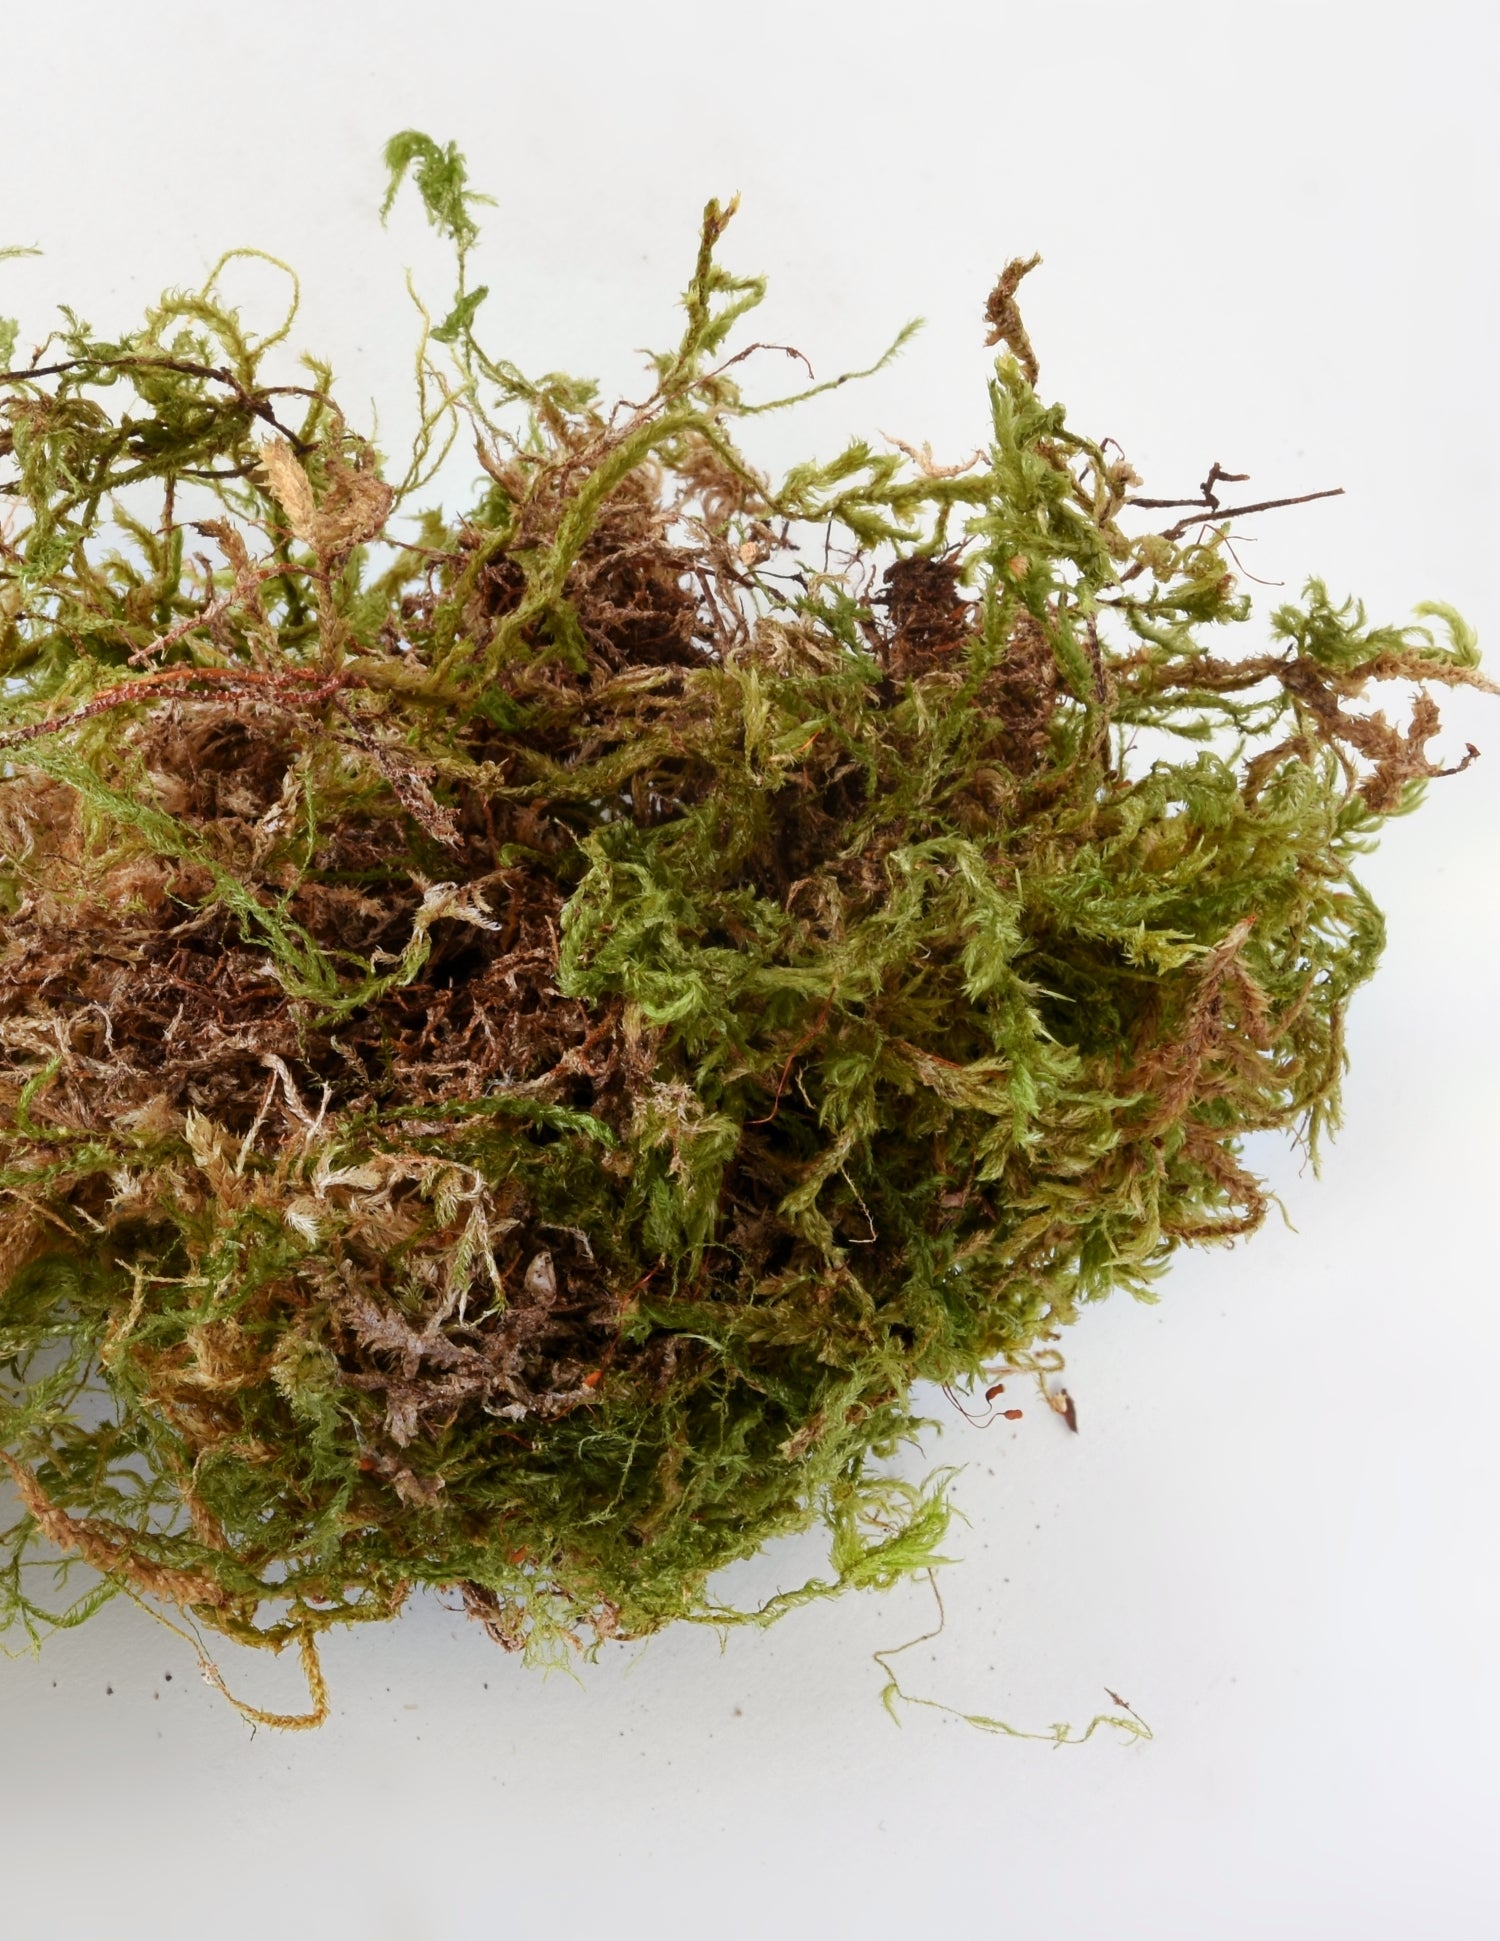 Sphagnum moss is really amazing